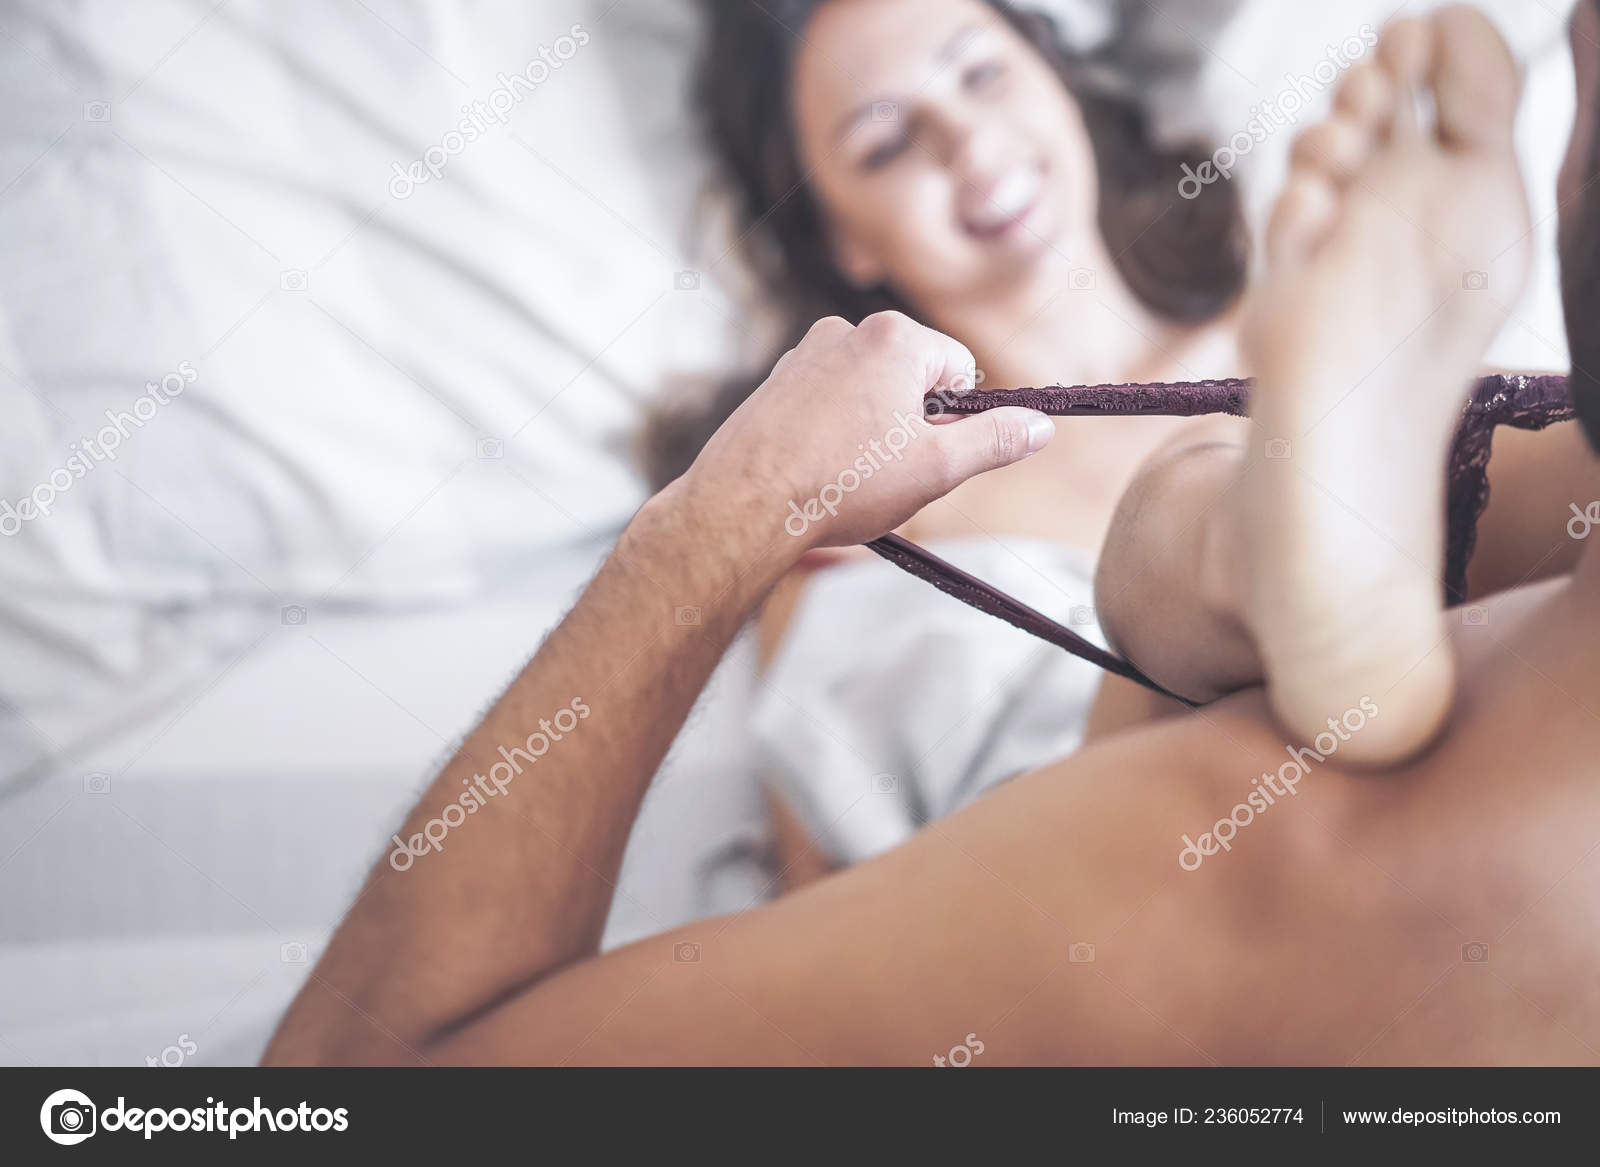 Boyfriend Putting His Girlfriends Panties Having Sex Bed Passionate Couple Stock Photo by ©AlessandroBiascioli 236052774 image